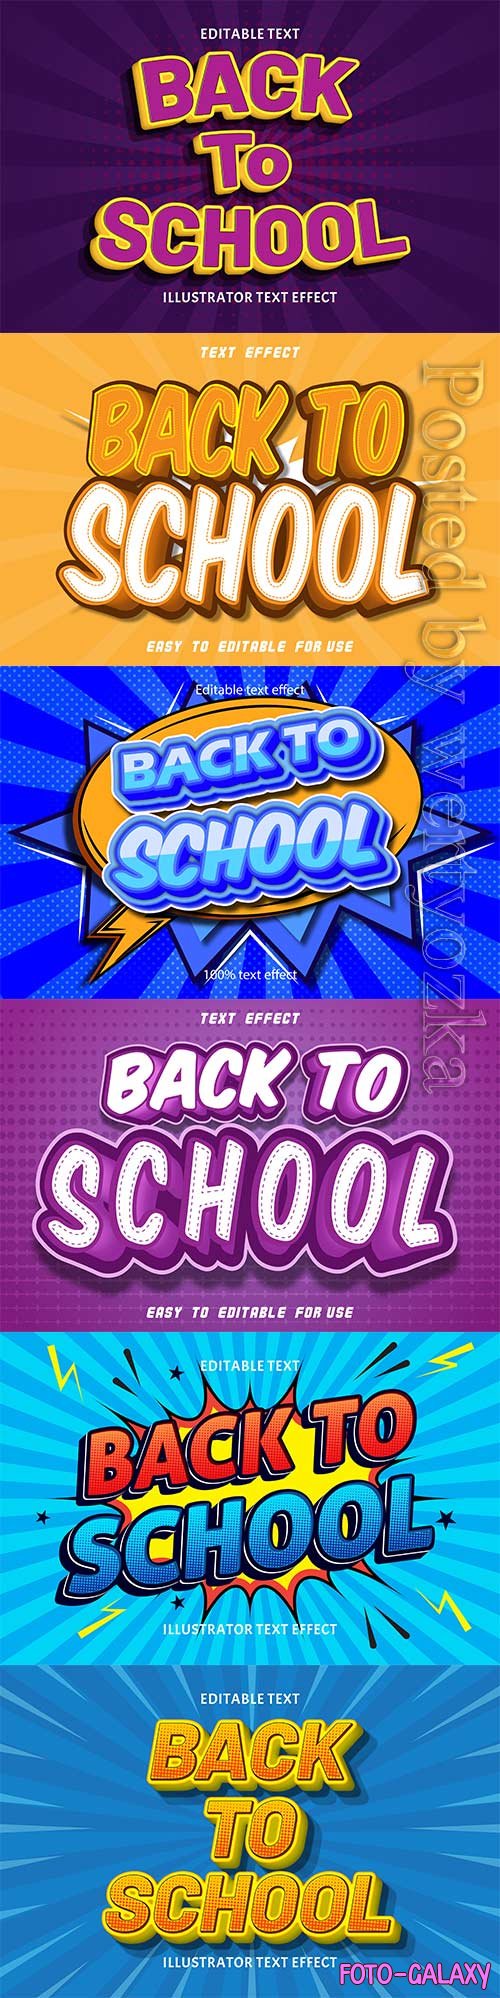 Back to school editable text effect vol 9